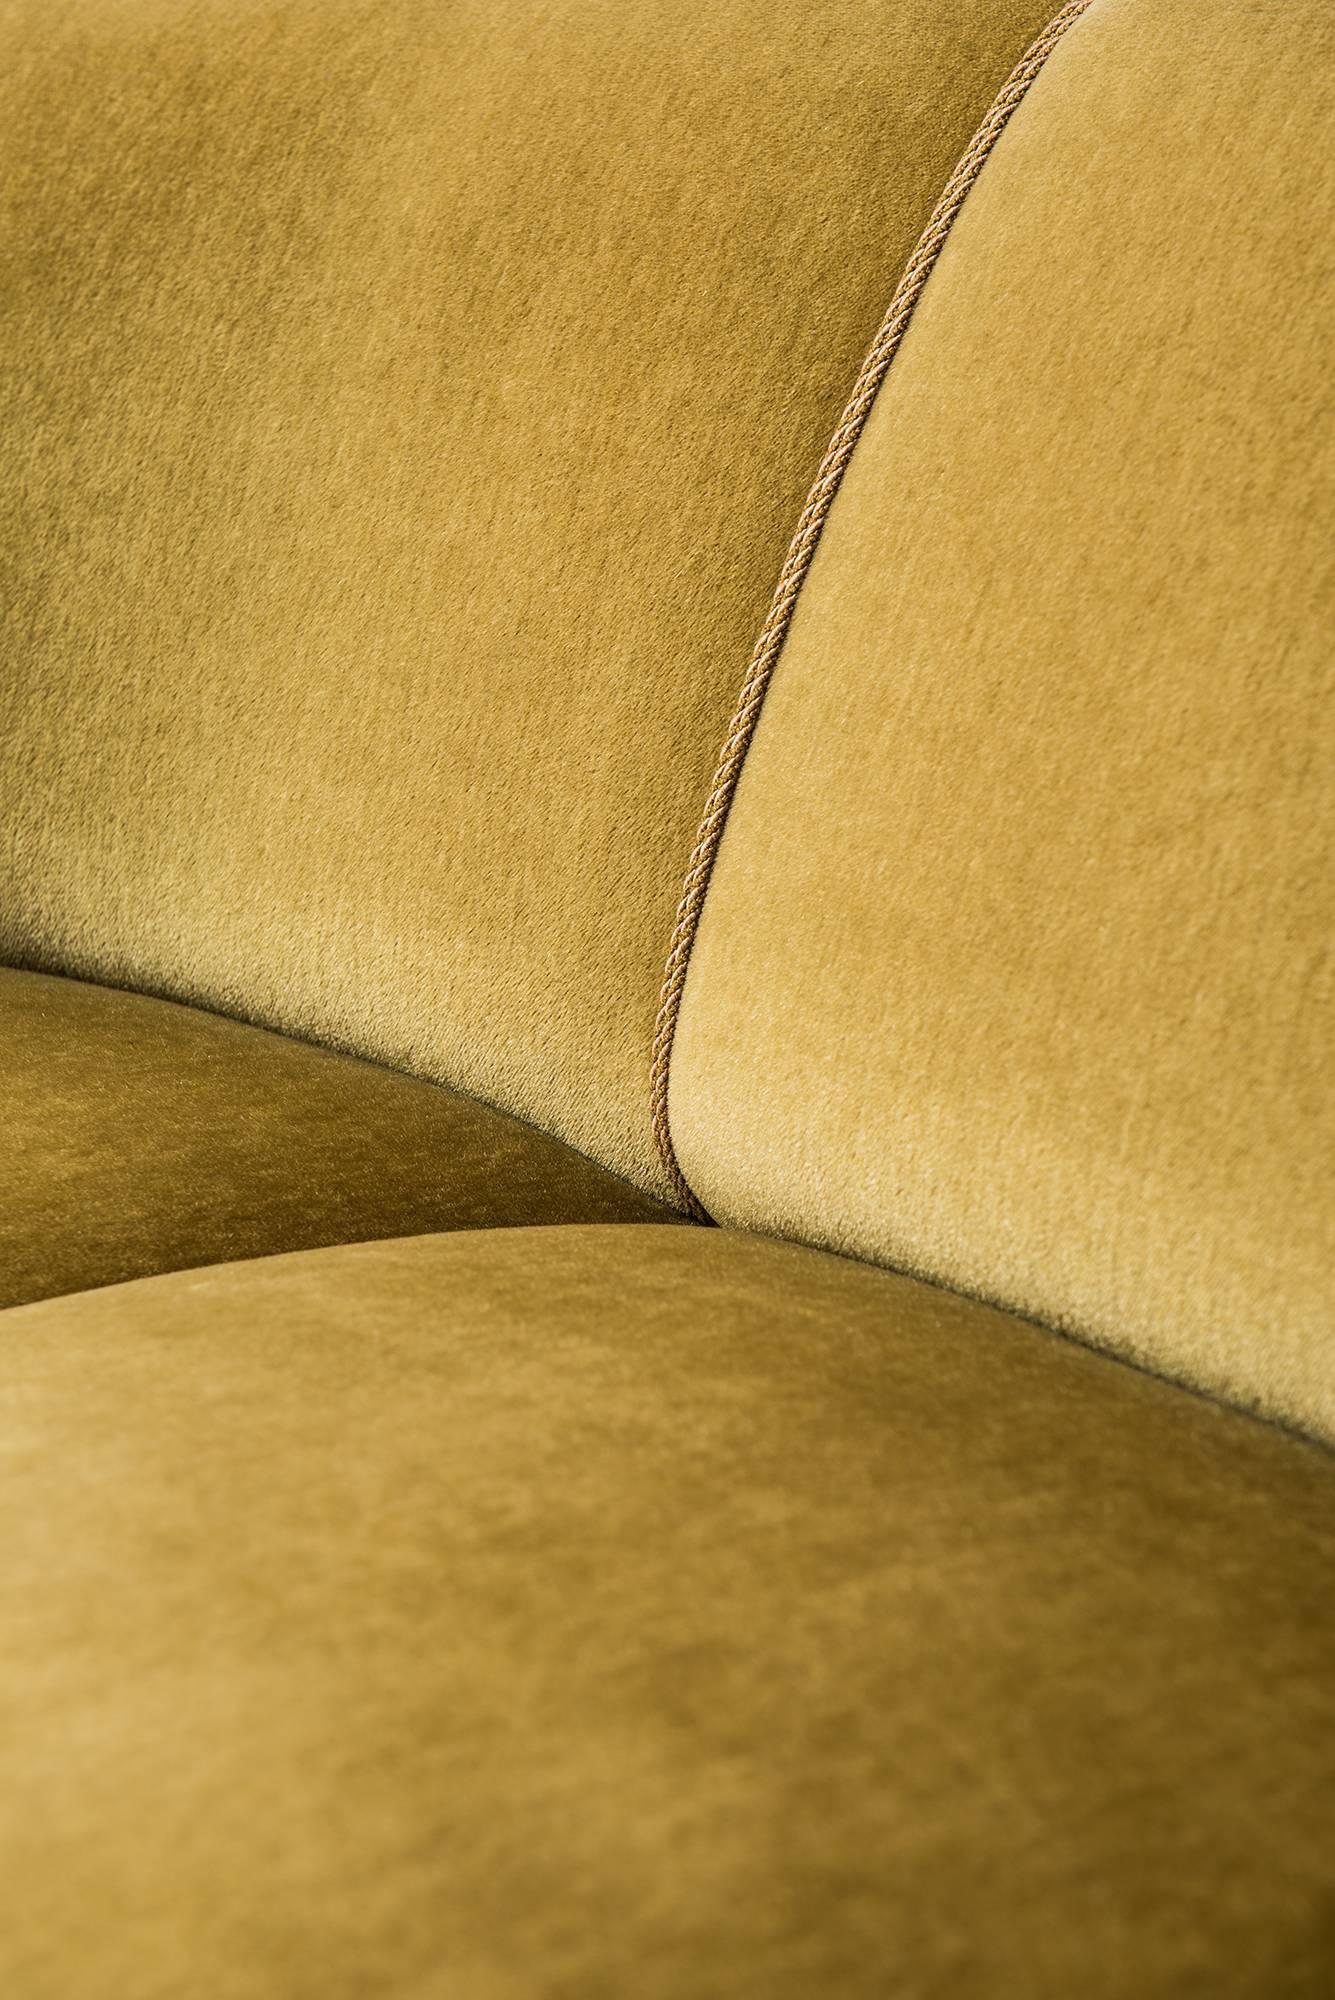 Large curved sofa in green or yellow velvet. Produced in Denmark.